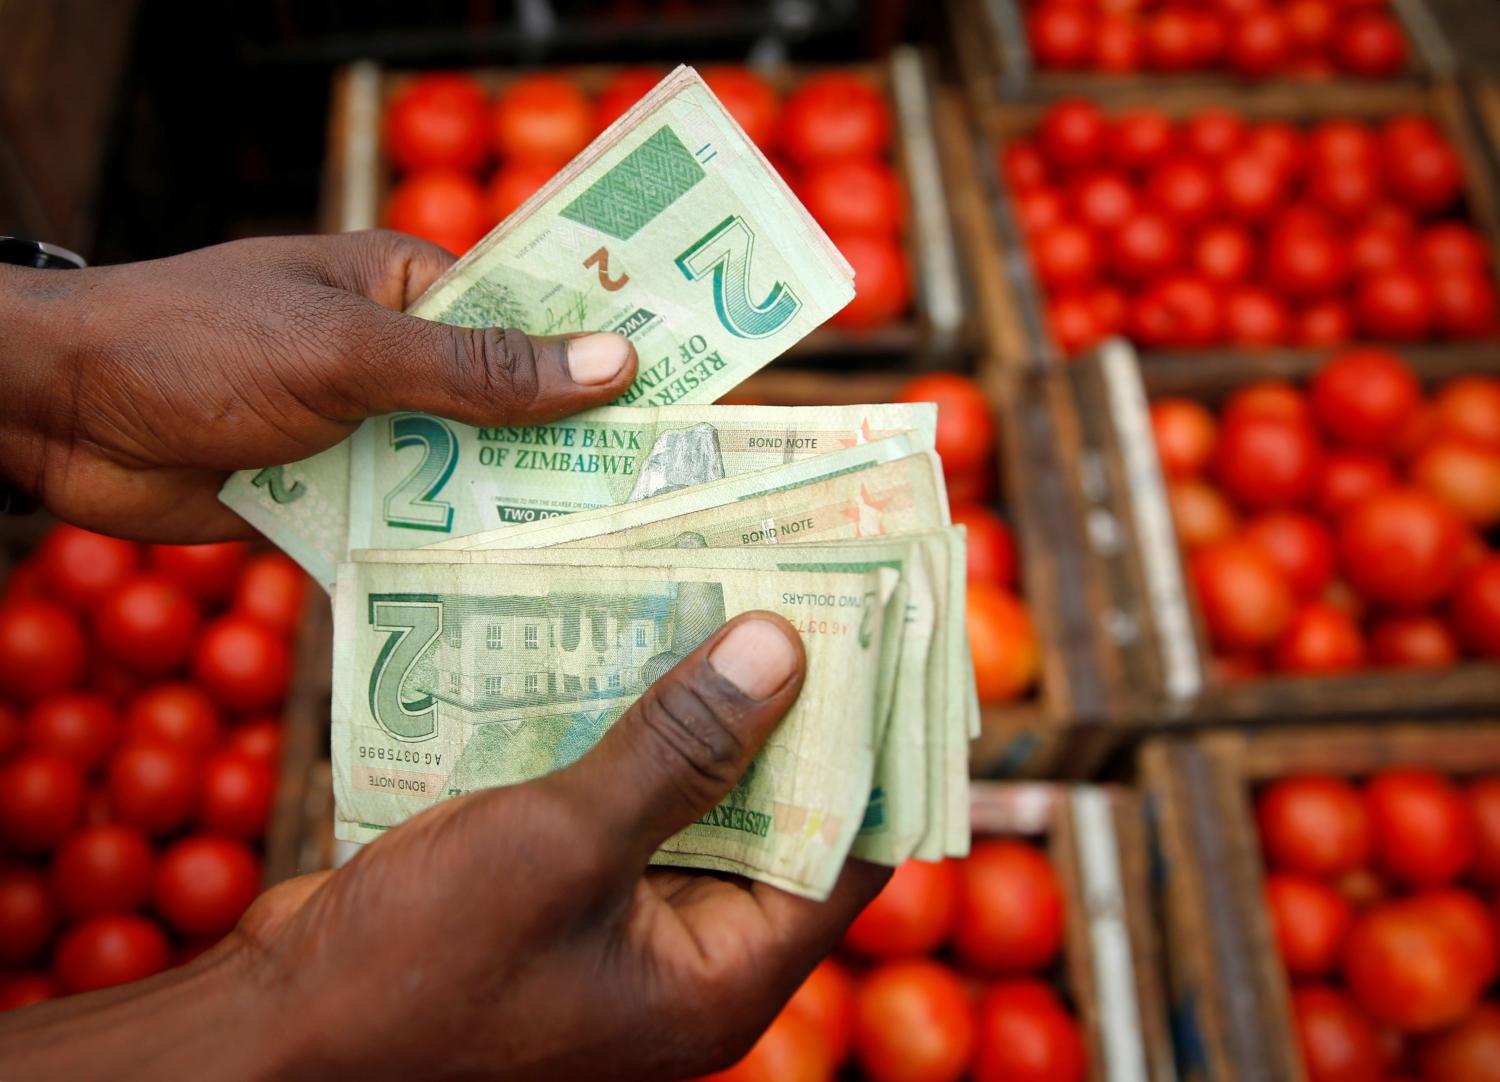 A man counts bond notes at a vegetable market in Harare, Zimbabwe, January 23, 2019. REUTERS/Philimon Bulawayo - RC11BE7ABB10